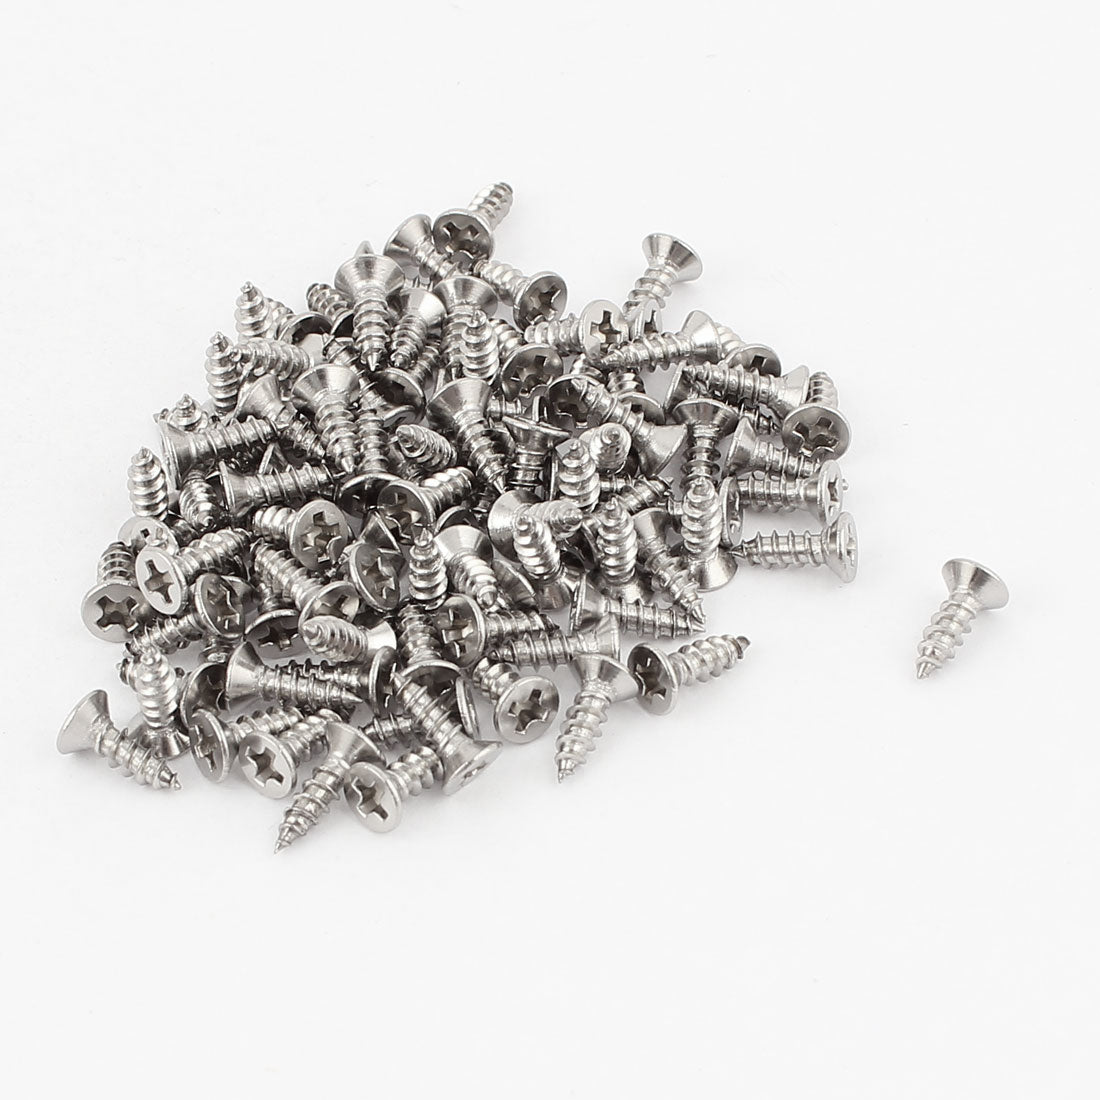 uxcell Uxcell M3x10mm Phillips Flat Head Stainless Steel Self Tapping Screws Fastener 100Pcs